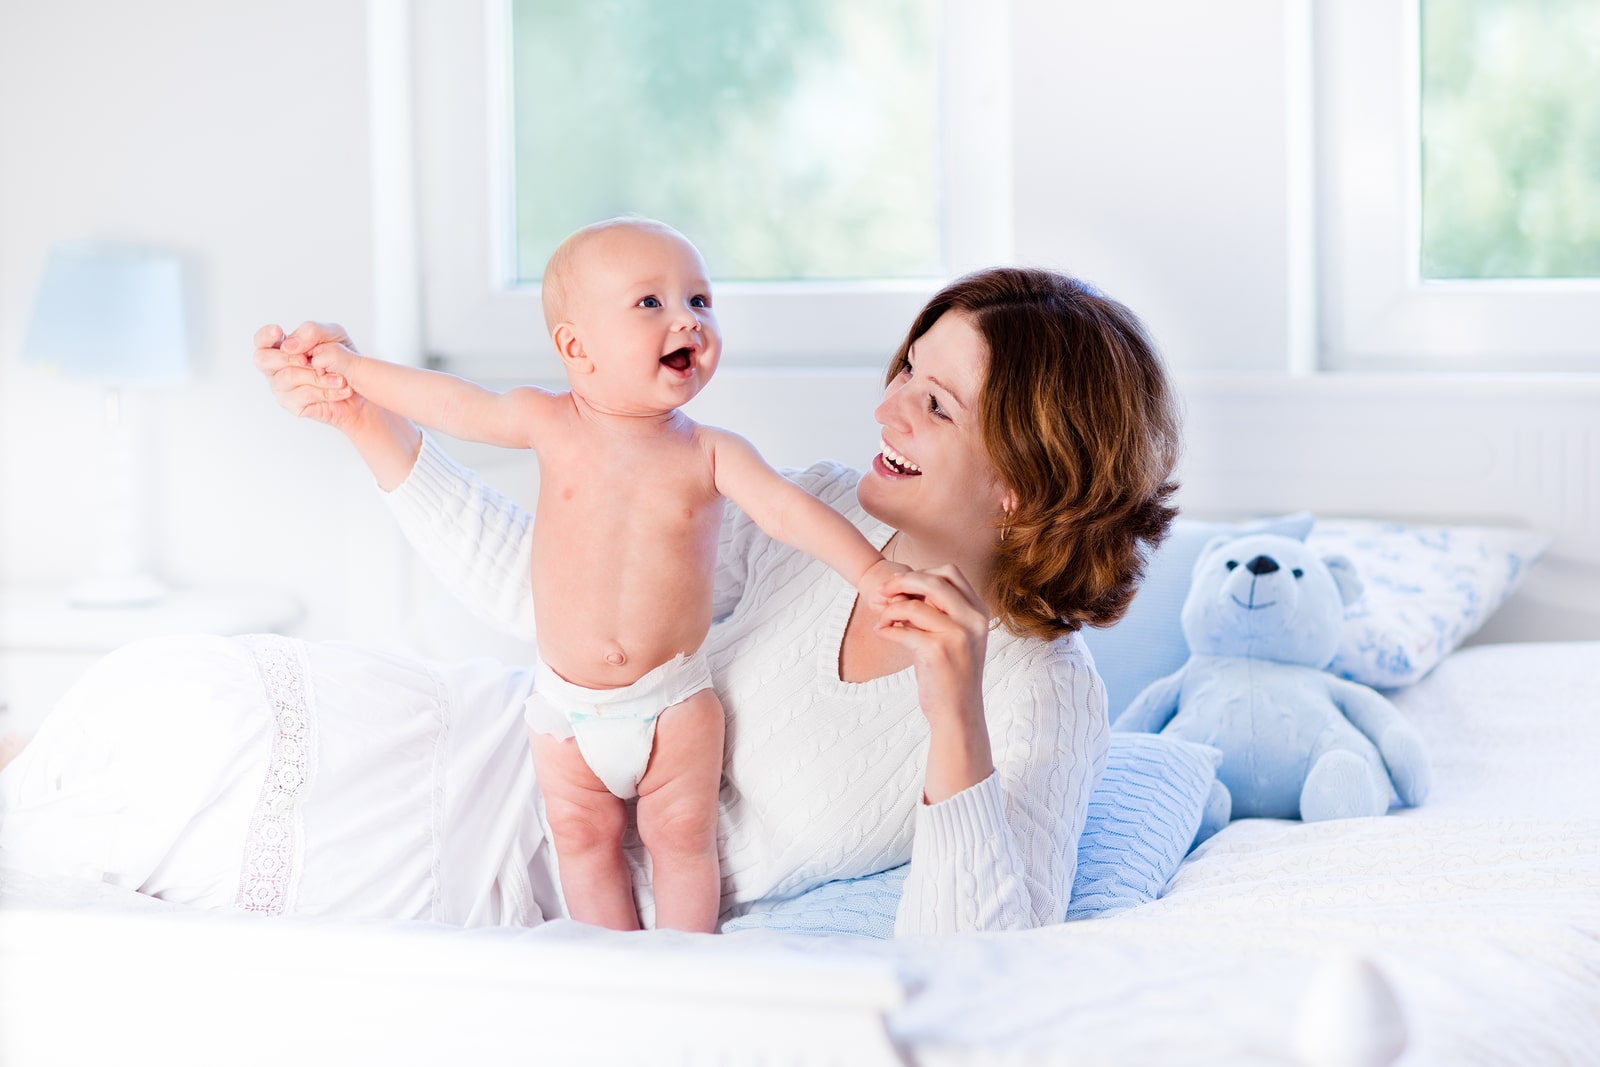 Mother and child on a white bed. Mom and baby boy in diaper playing in sunny bedroom. Parent and little kid relaxing at home. Family having fun together. Bedding and textile for infant nursery.